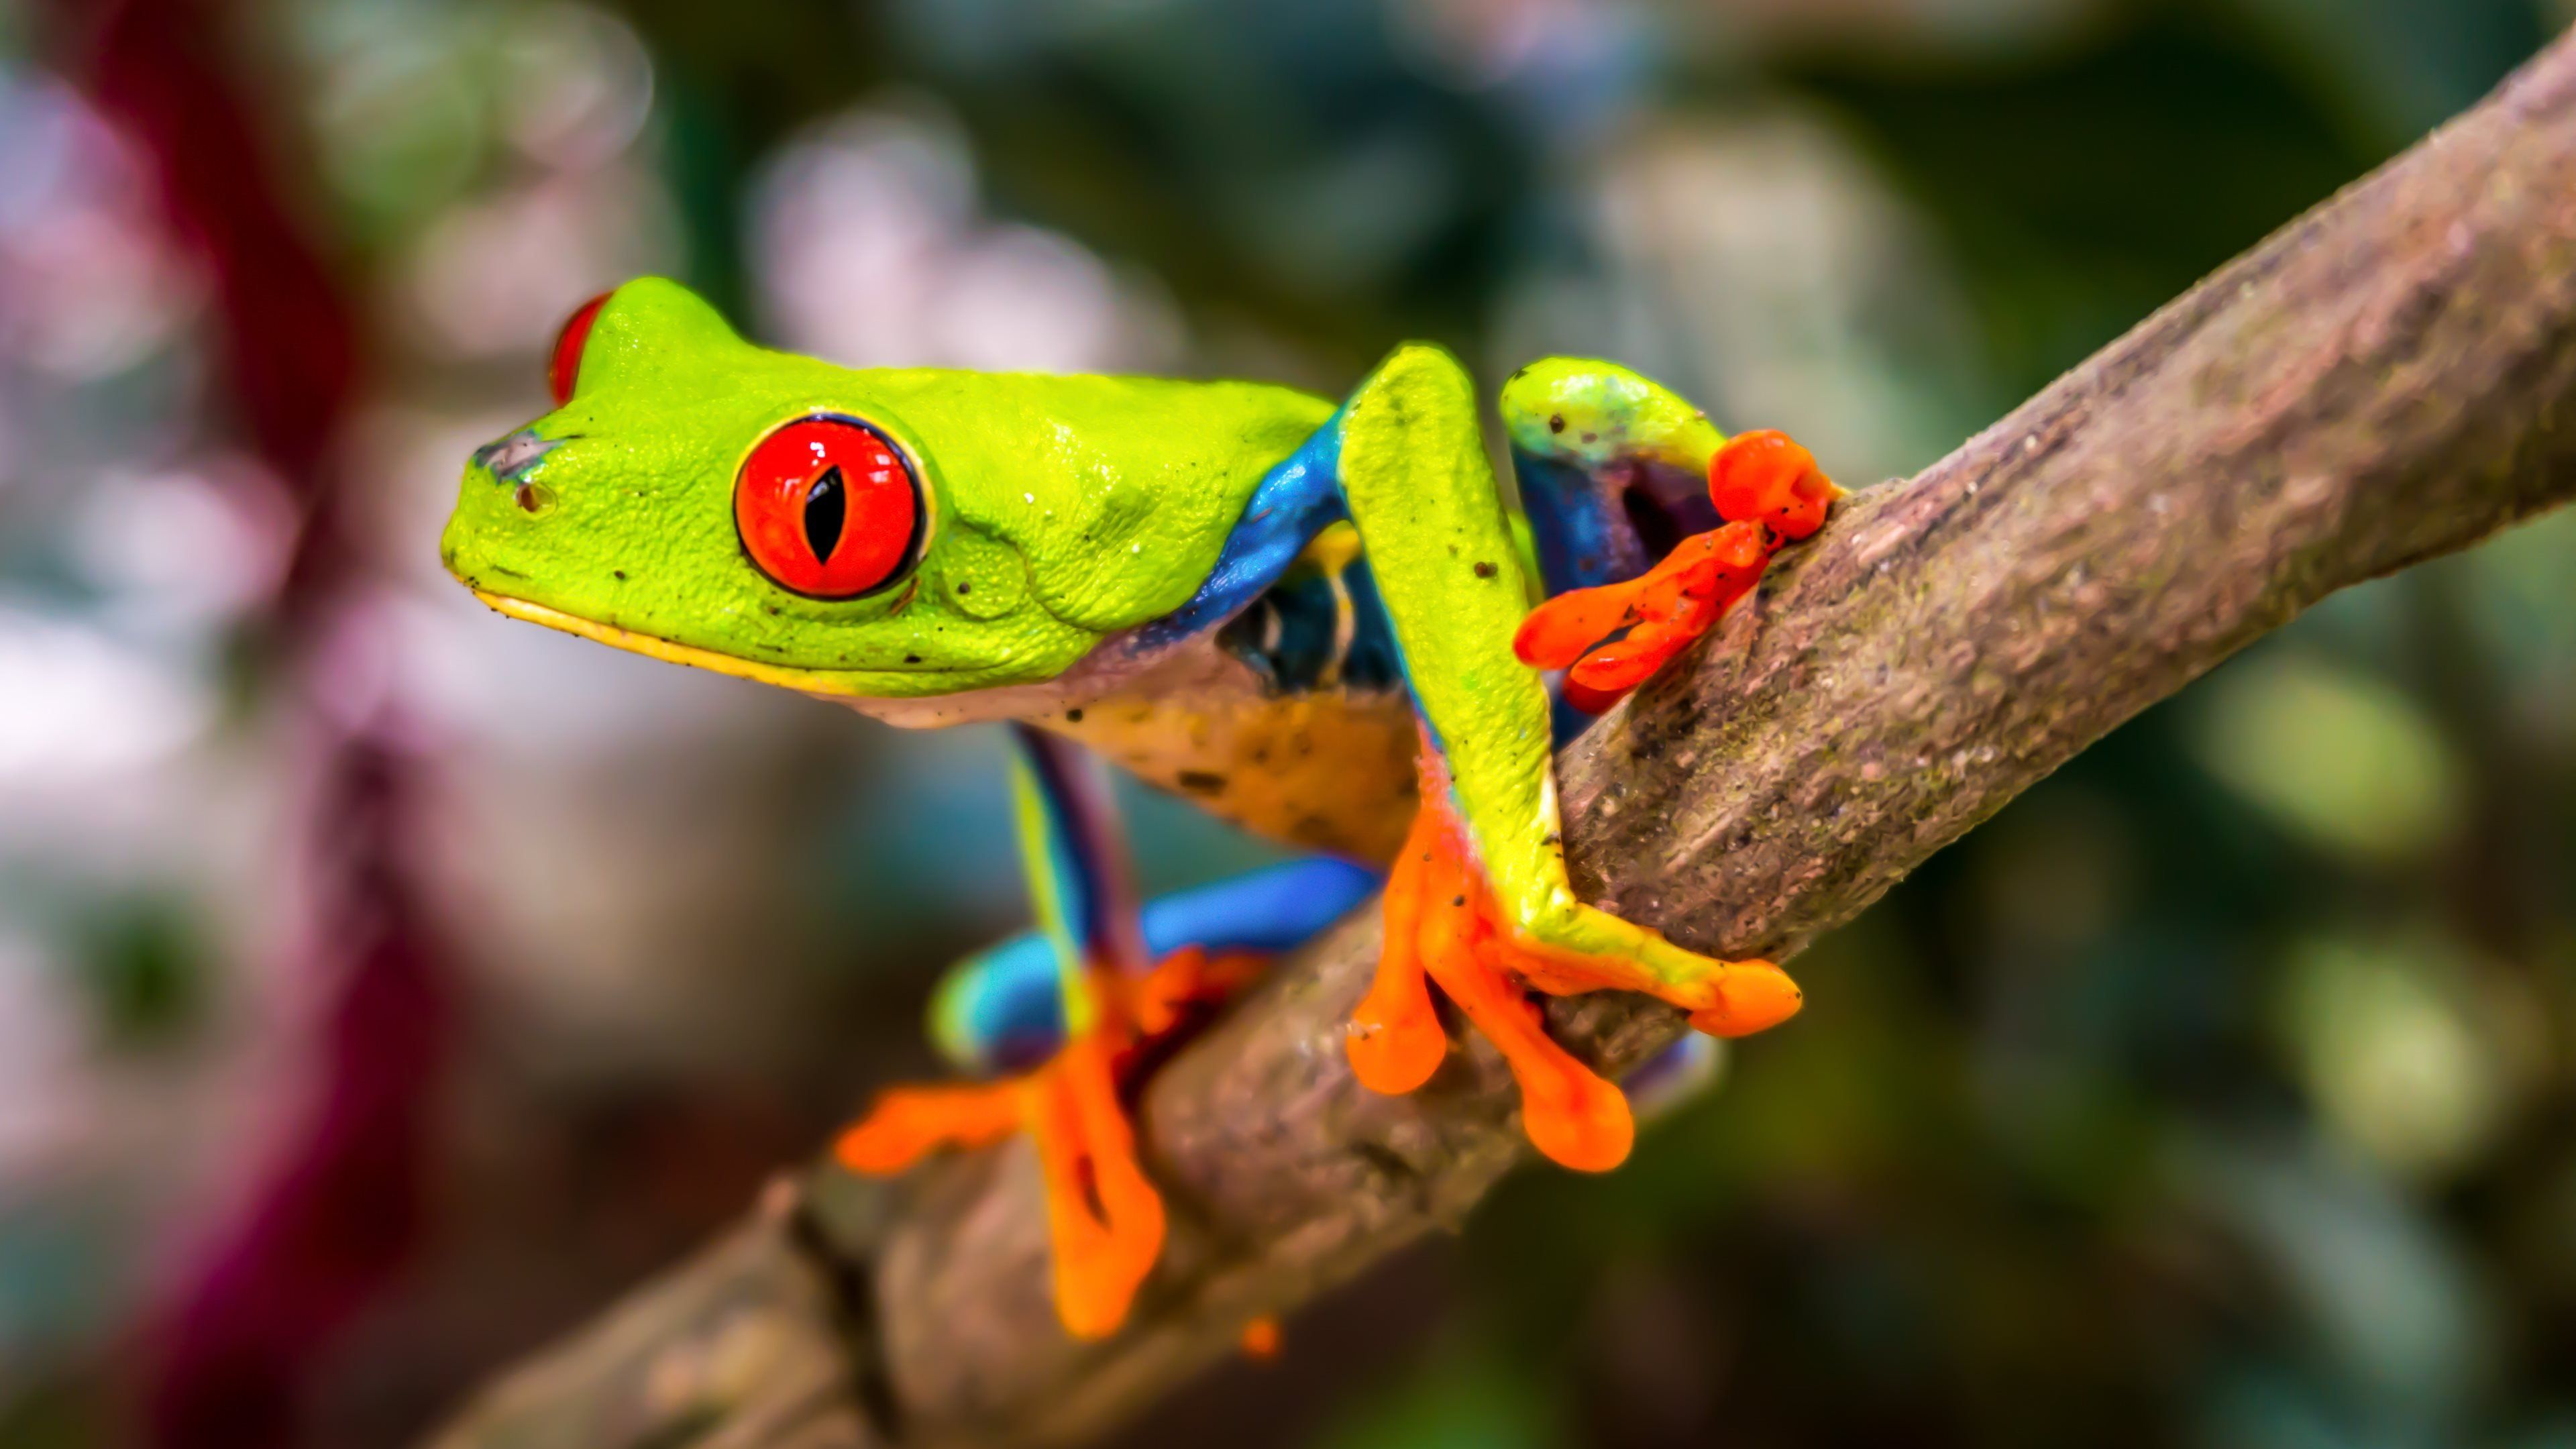 Beautiful Tree Frog Definition Wallpaper. Red eyed tree frog, Frog wallpaper, Tree frogs